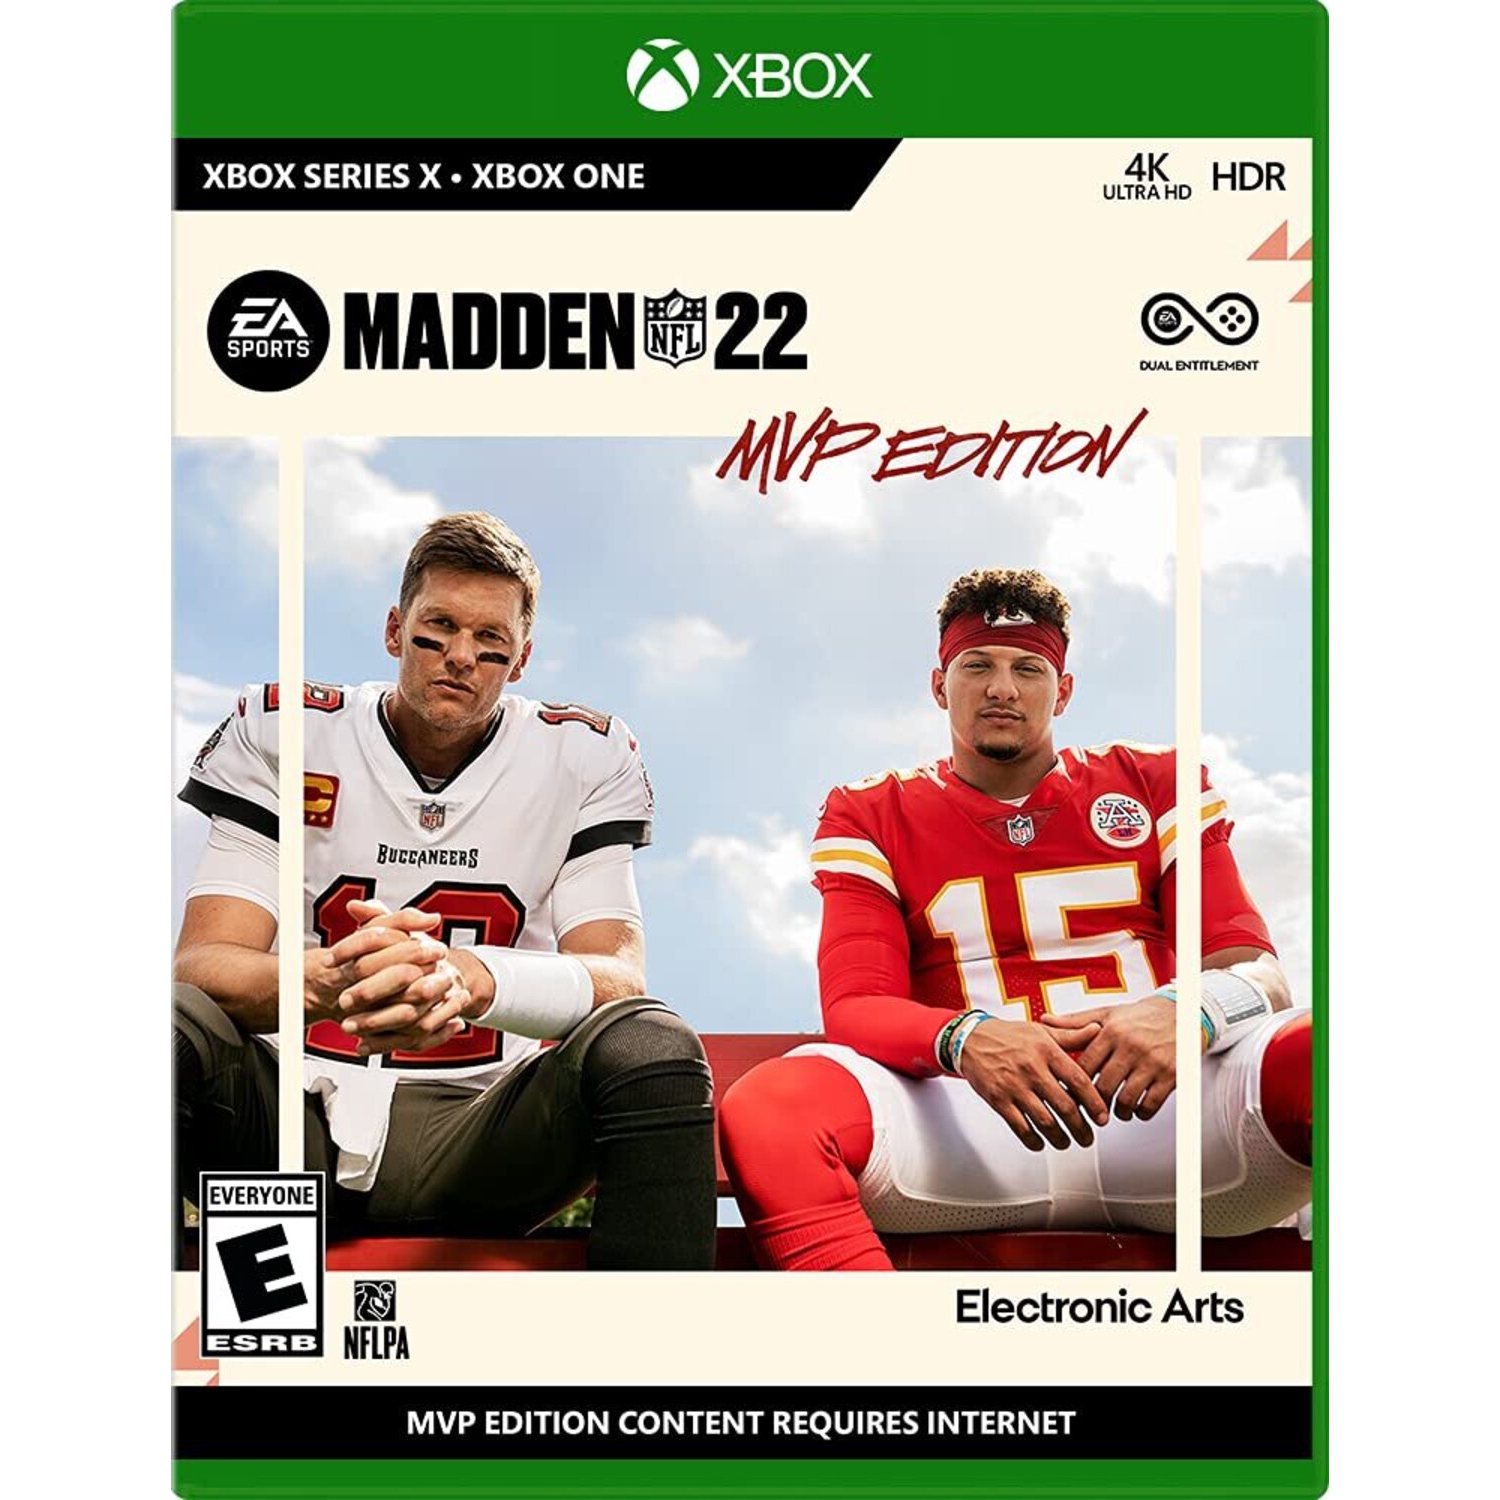 Madden NFL 22 MVP Edition for Xbox One and Xbox Series X [VIDEOGAMES] Xbox One